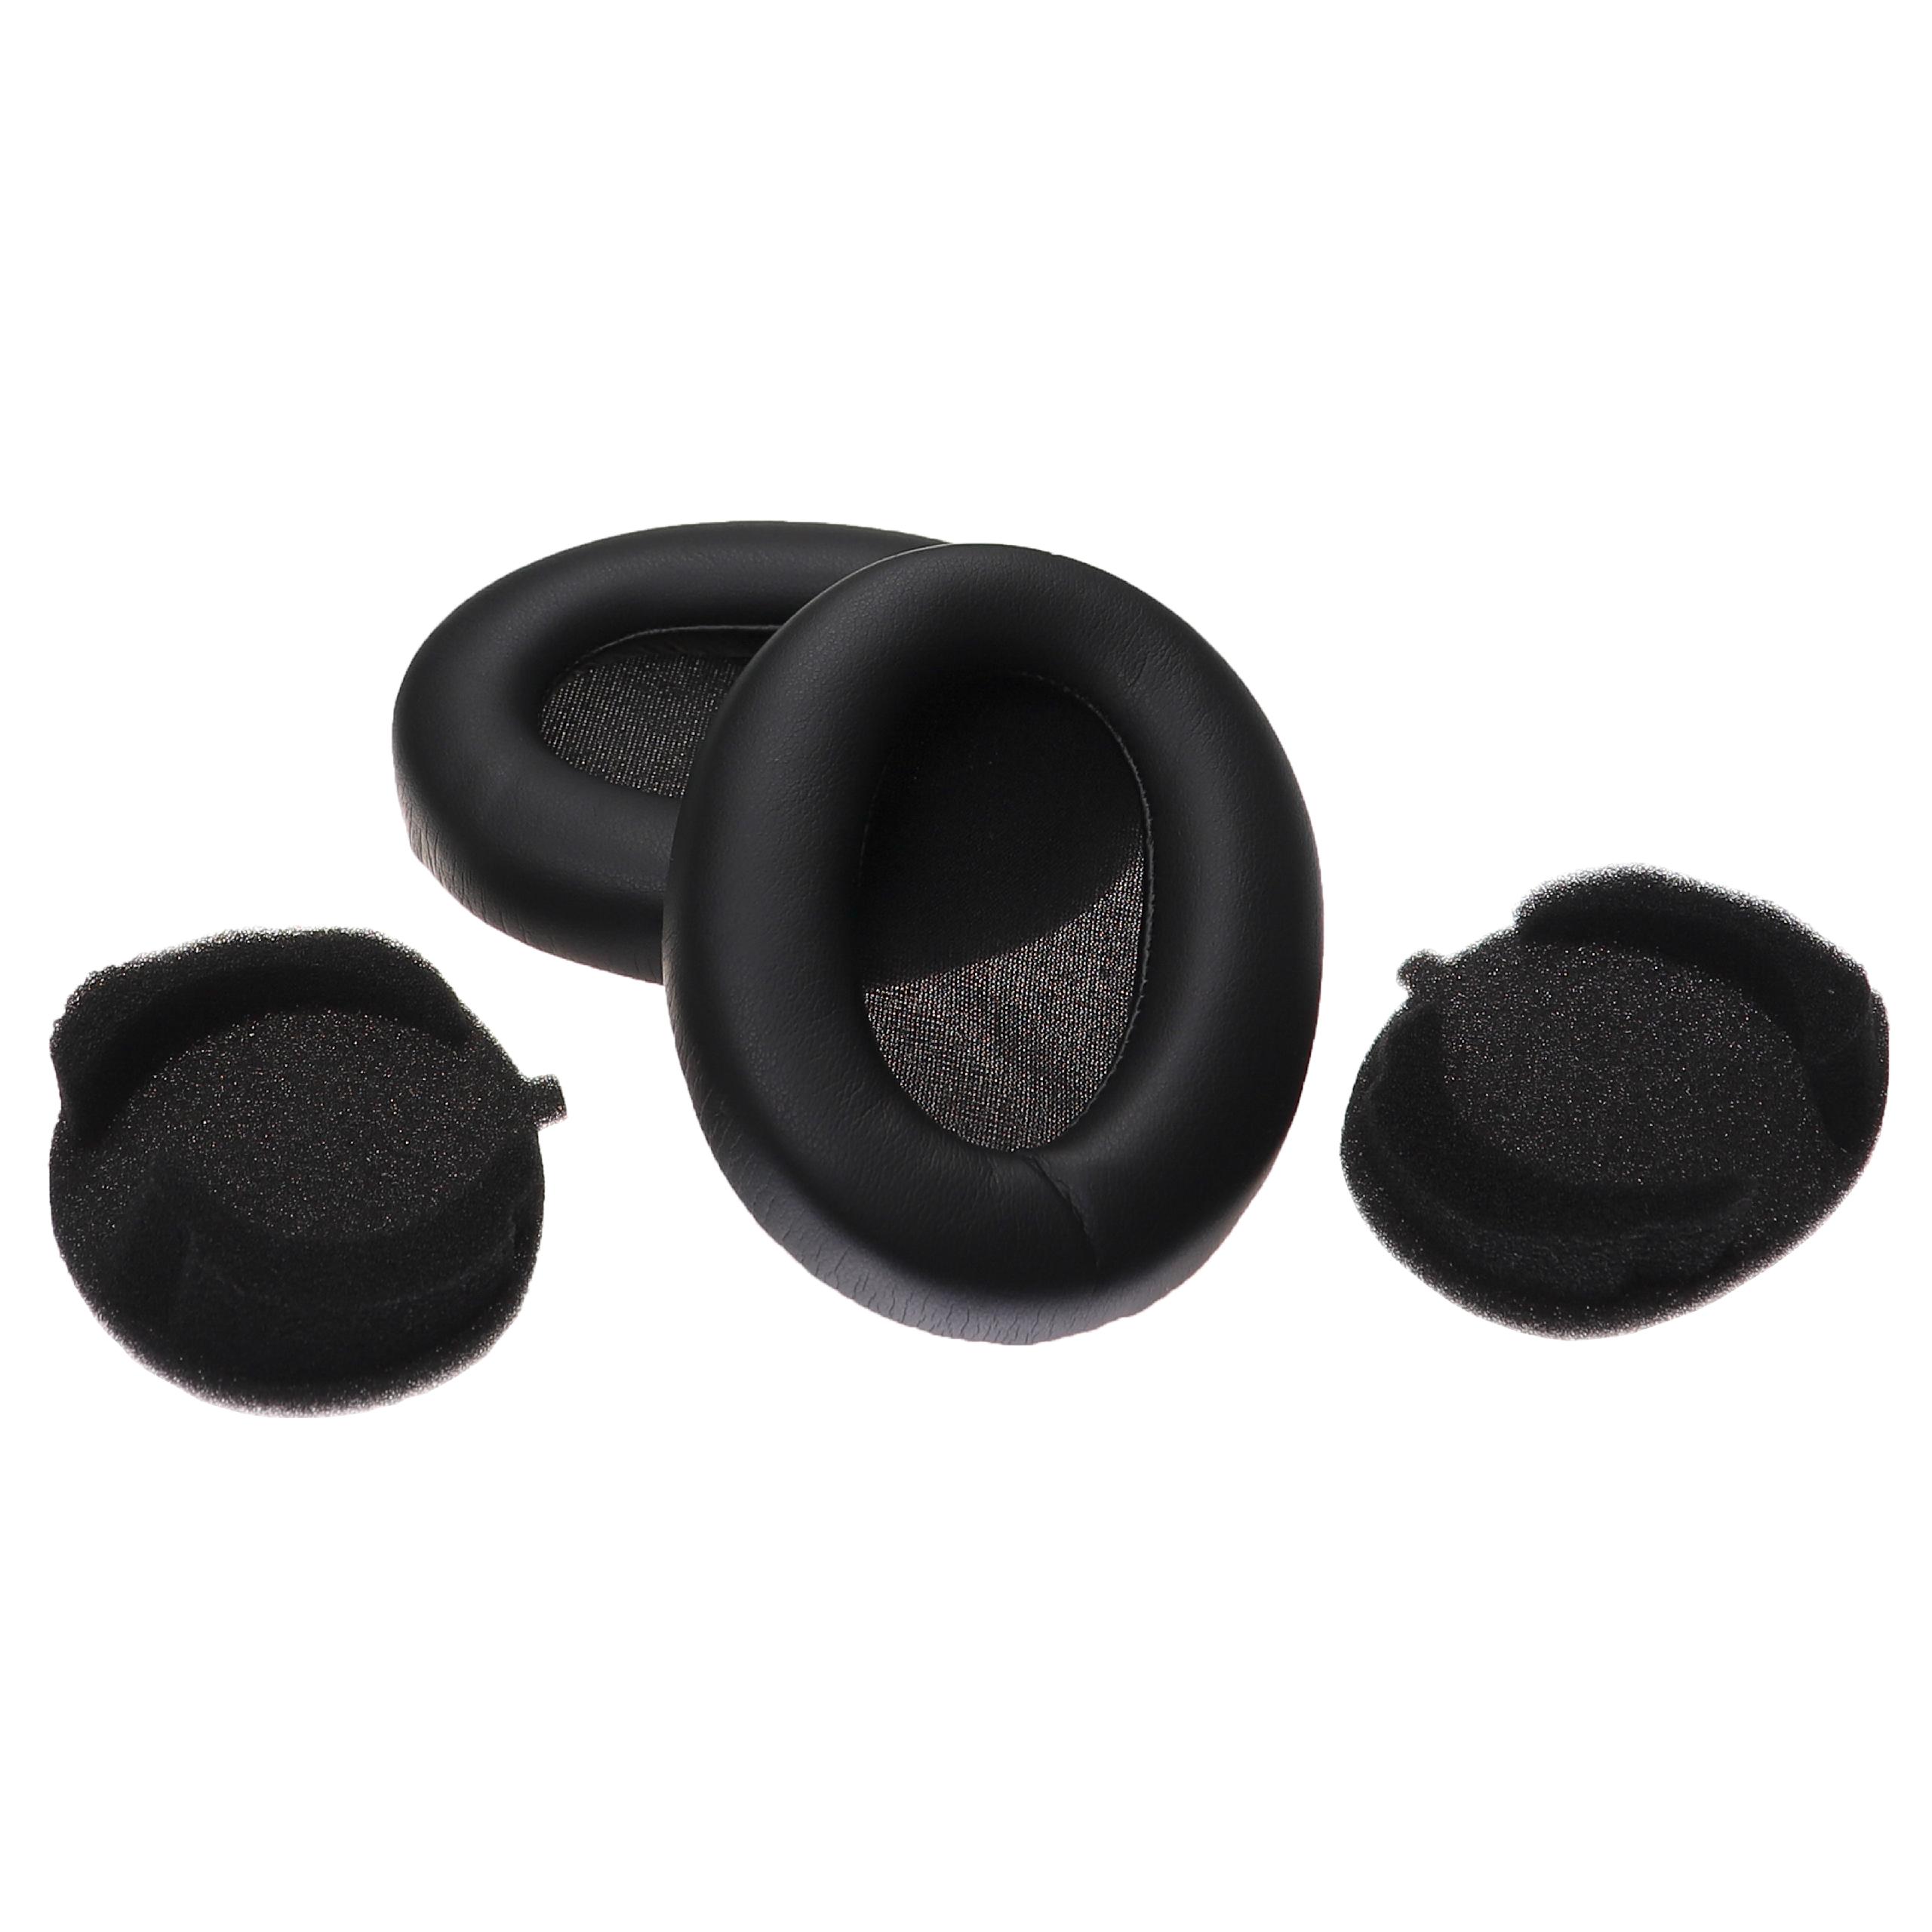 Ear Pads suitable for Sony WH-1000XM3 Headphones etc. - with Memory Foam, Soft Material, 28 mm thick